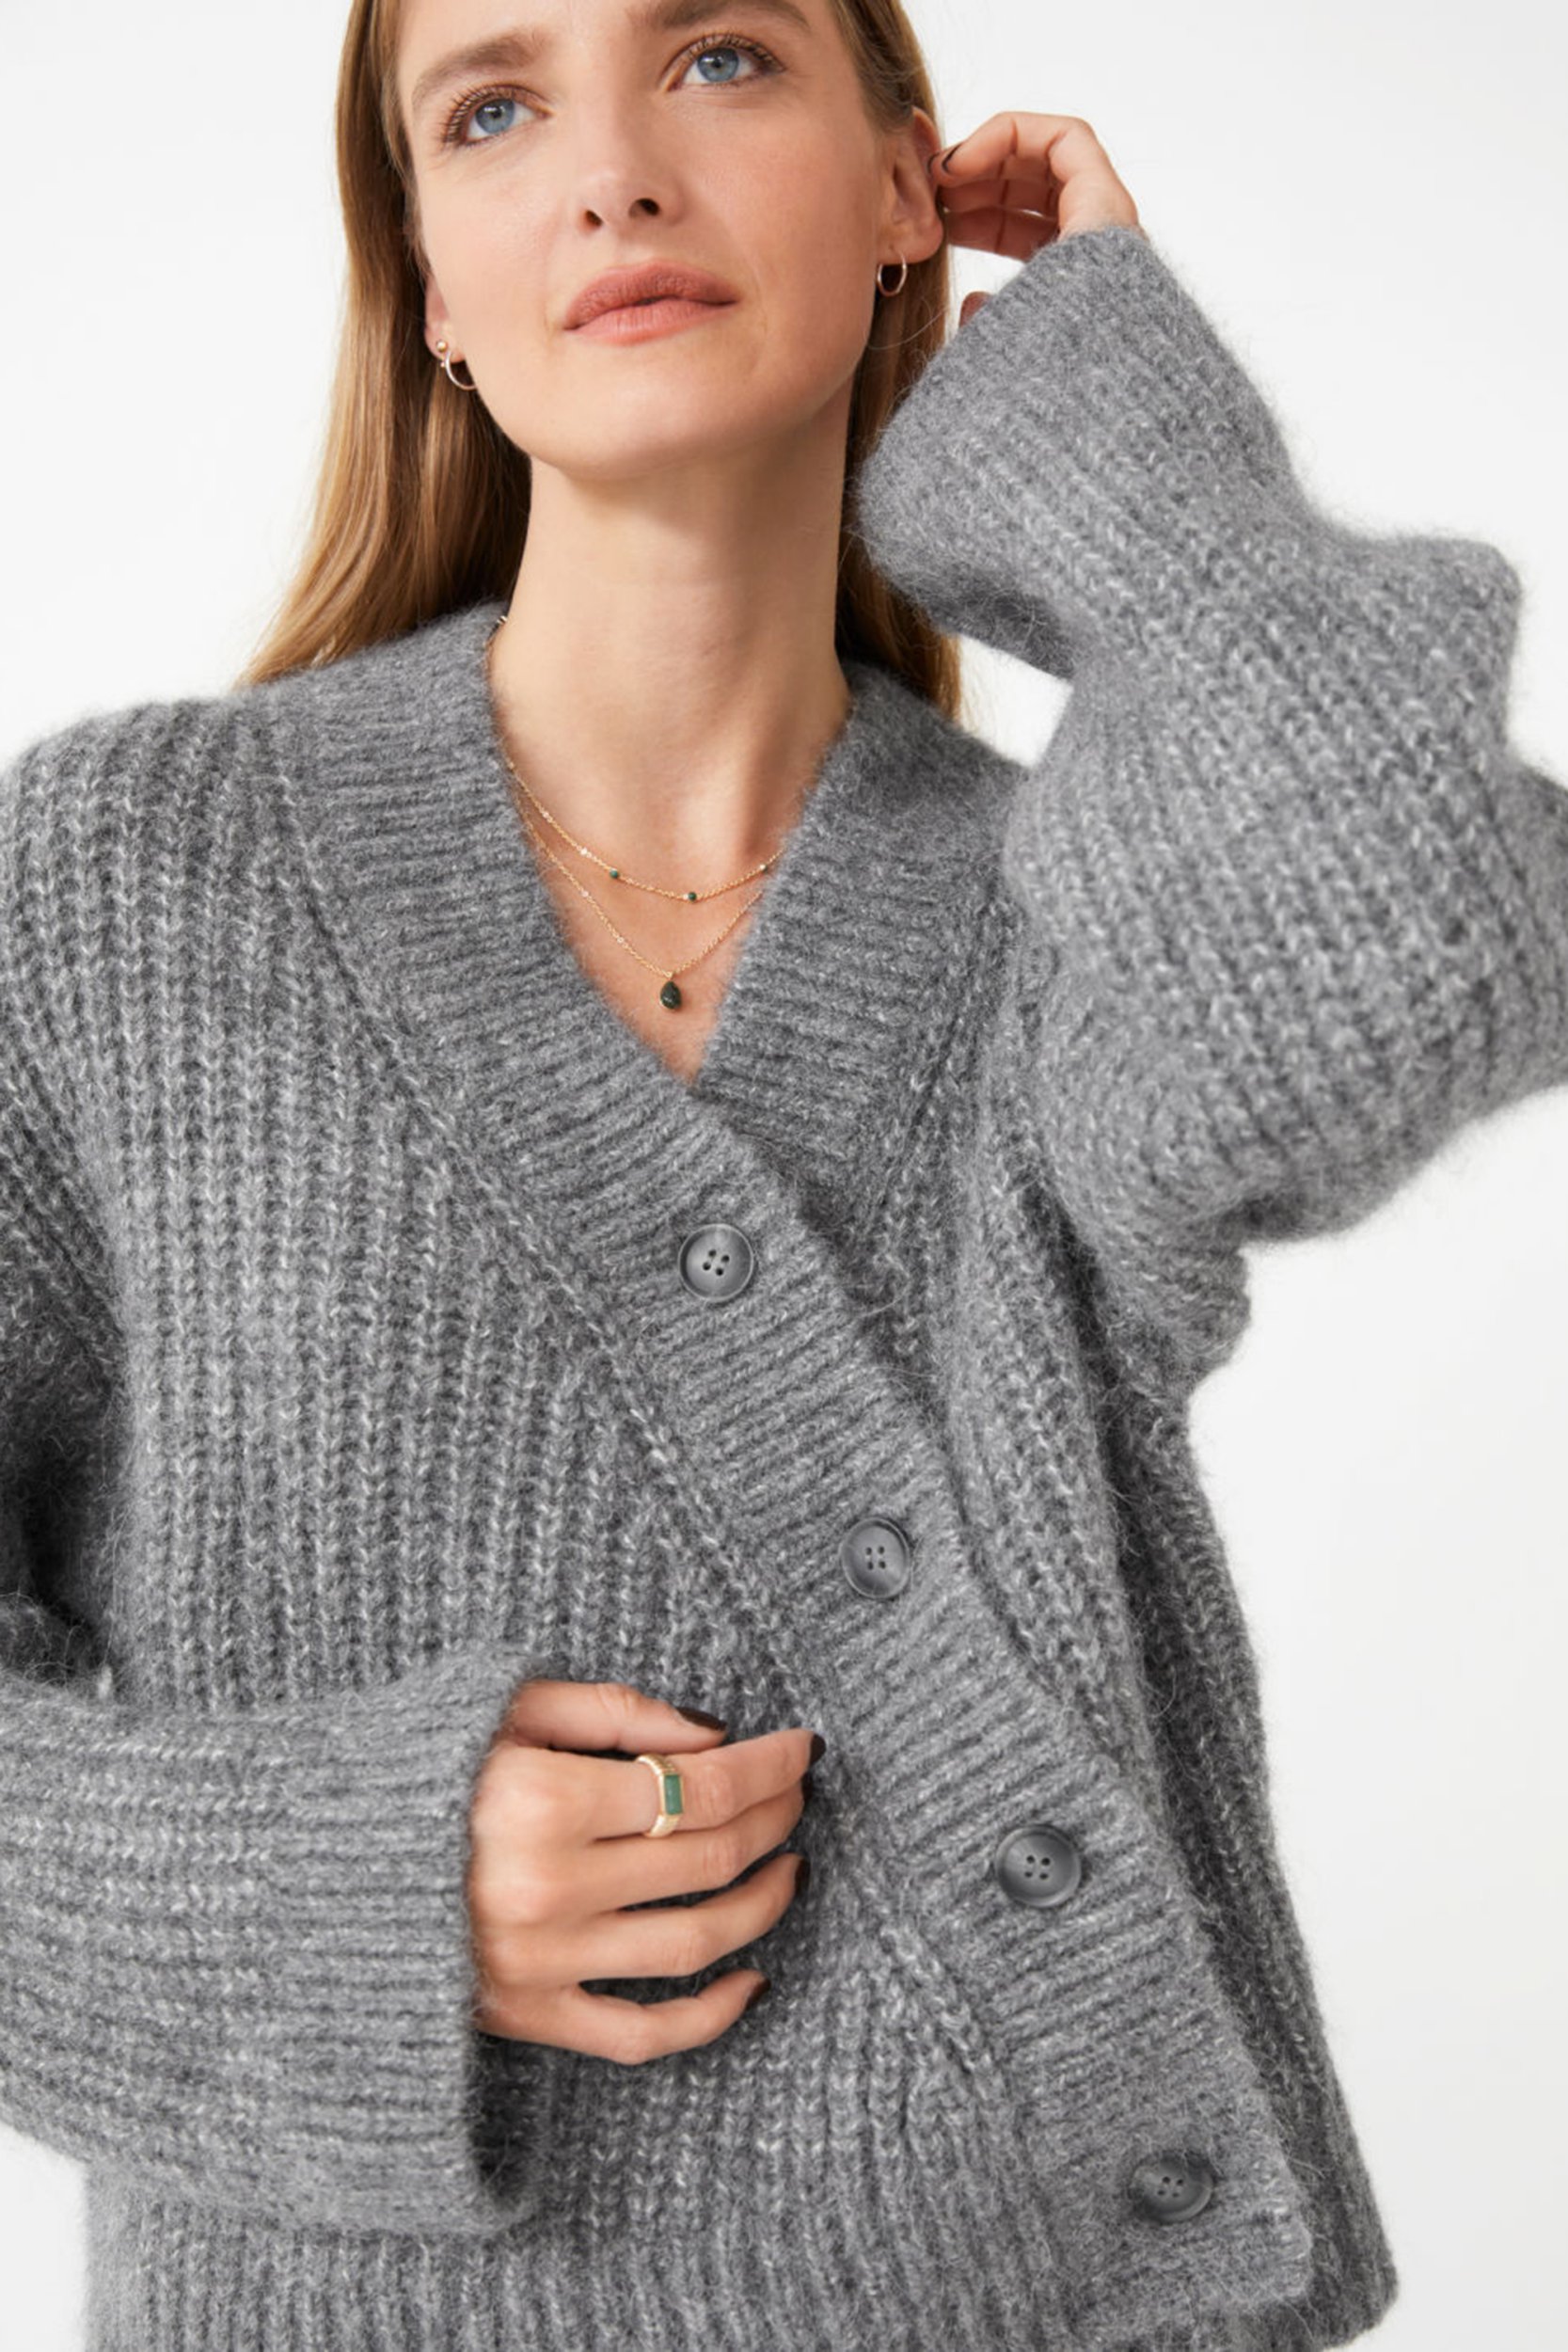 Relaxed Overlap Knit Cardigan model. Image Stories.